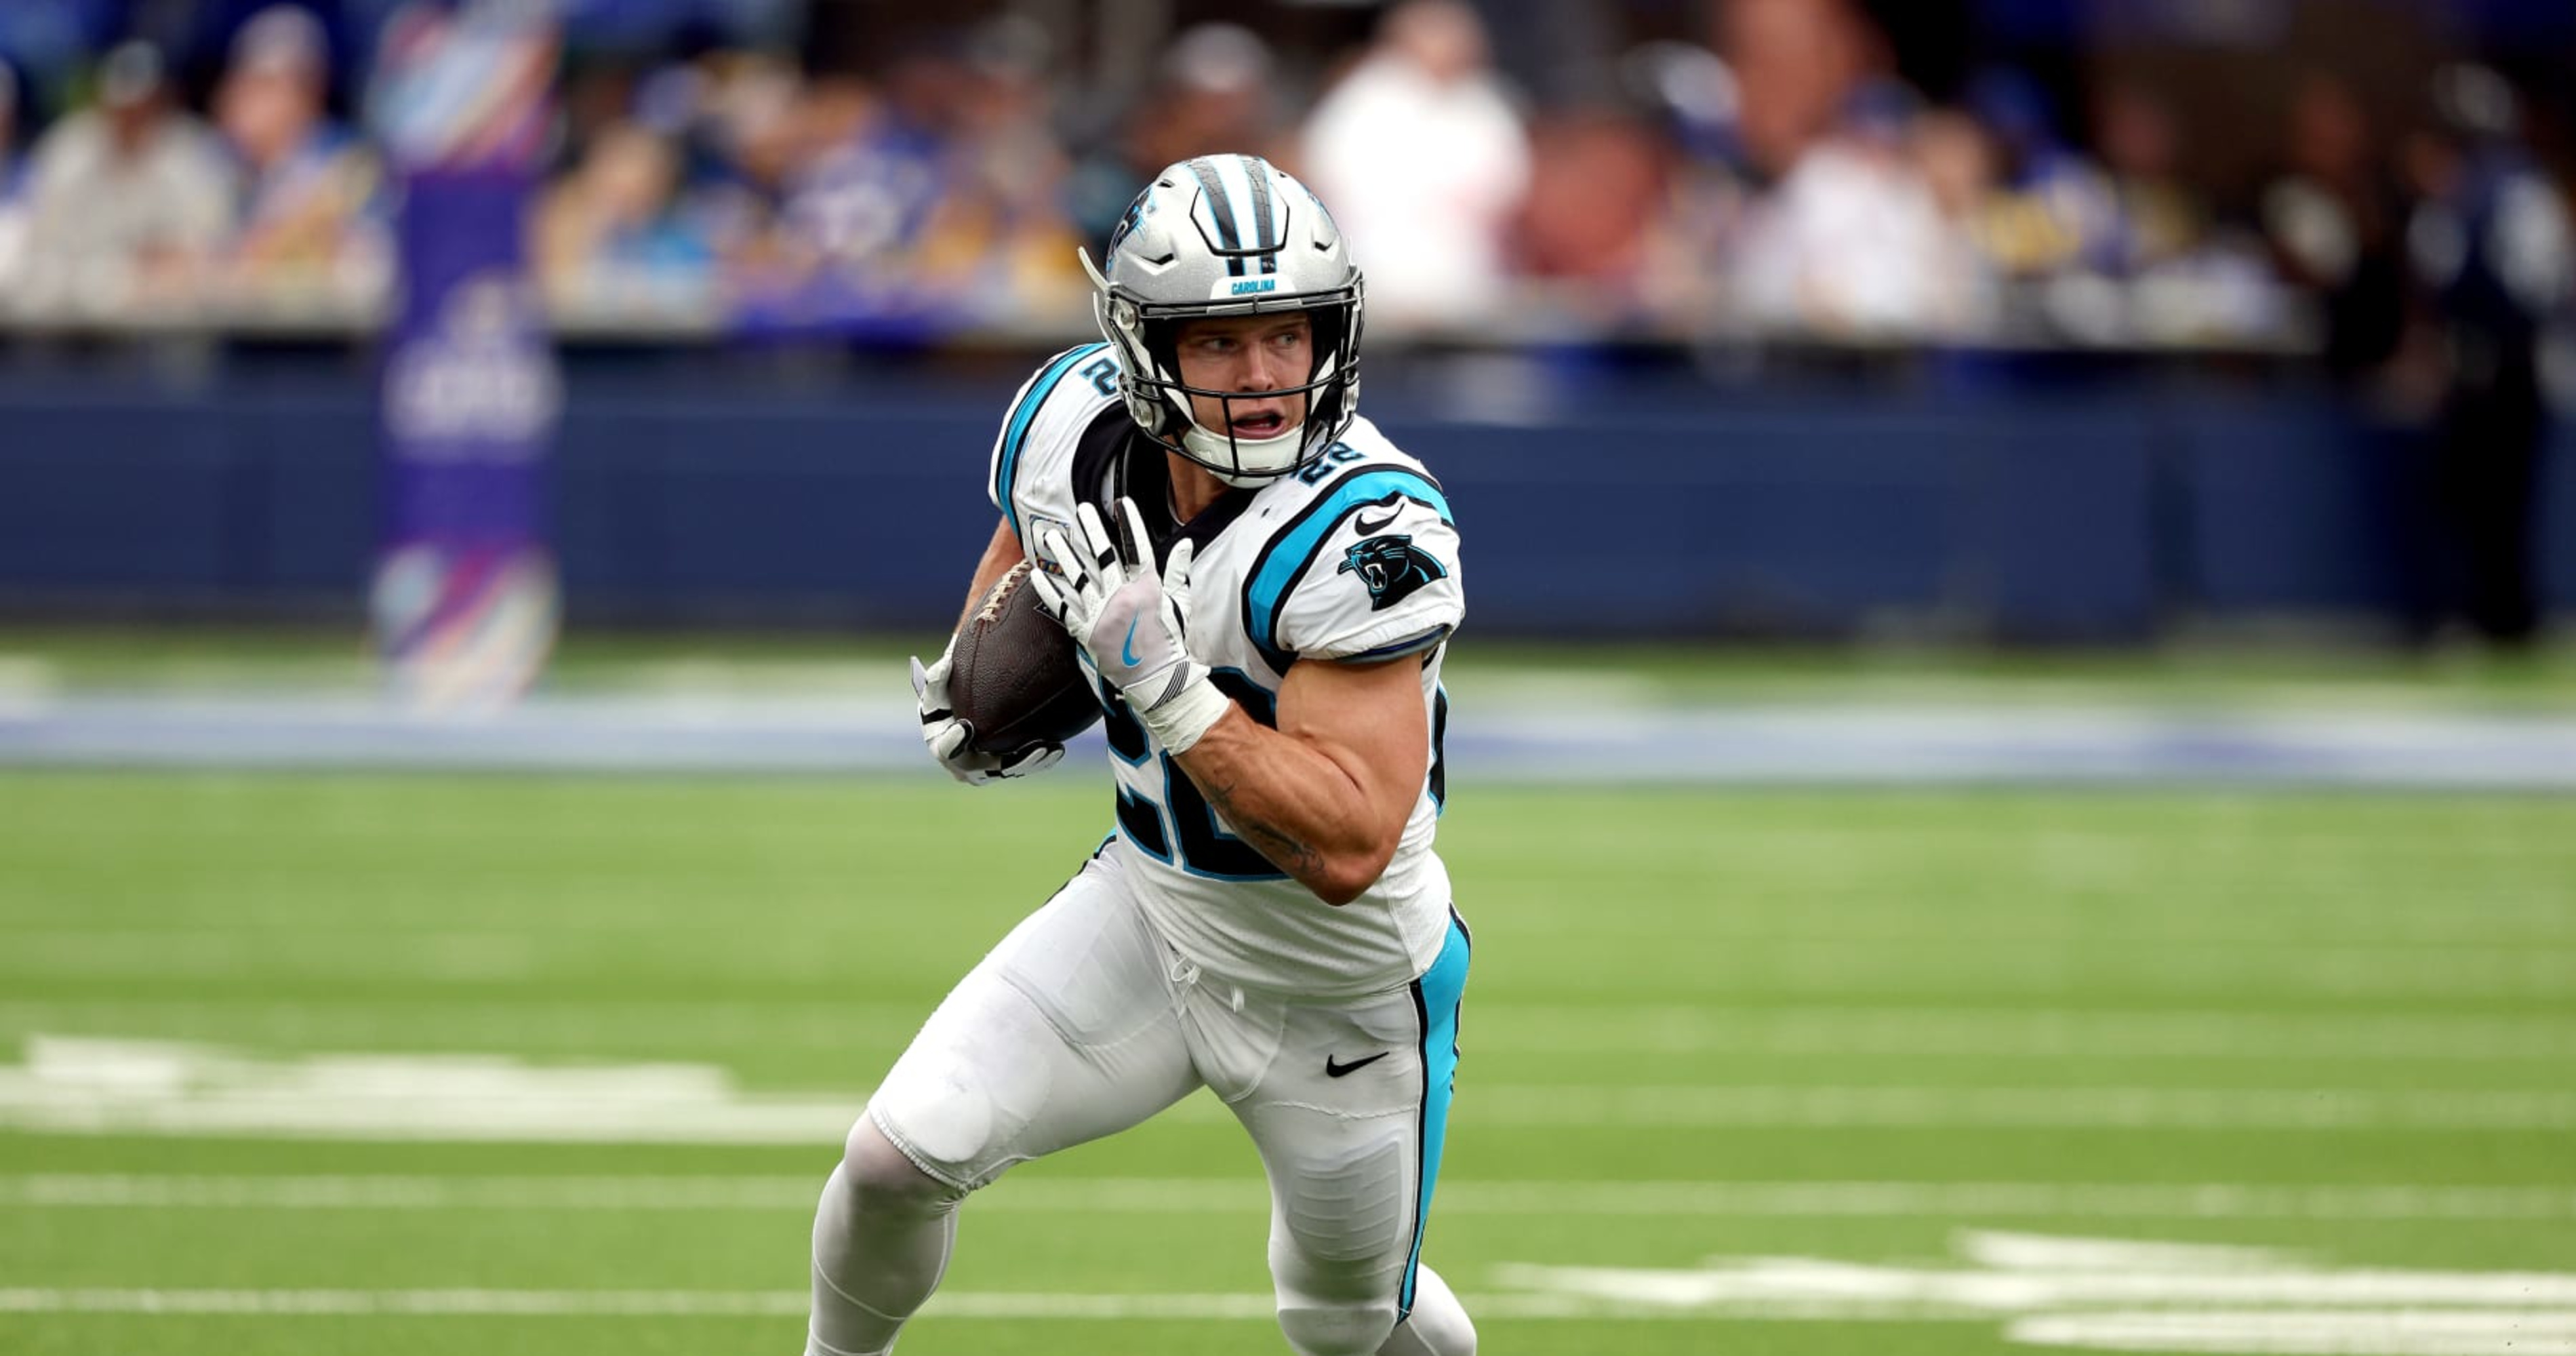 Christian McCaffrey to Wear No. 23 After Trade from Panthers to